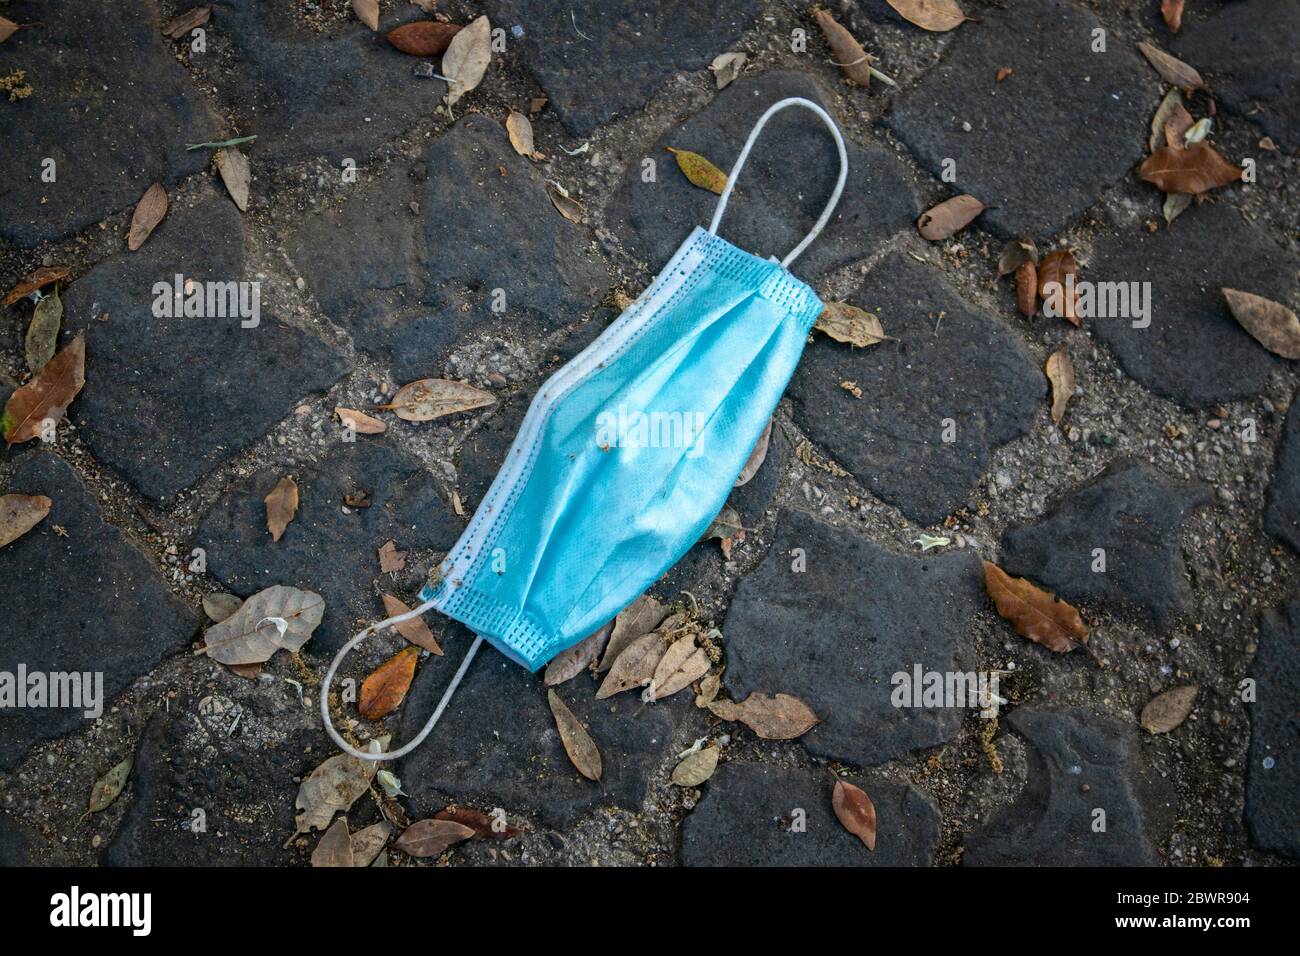 A protective mask abandoned on the road, on the ground. Symbol of the end of the restrictions for the coronavirus pandemic. Stock Photo